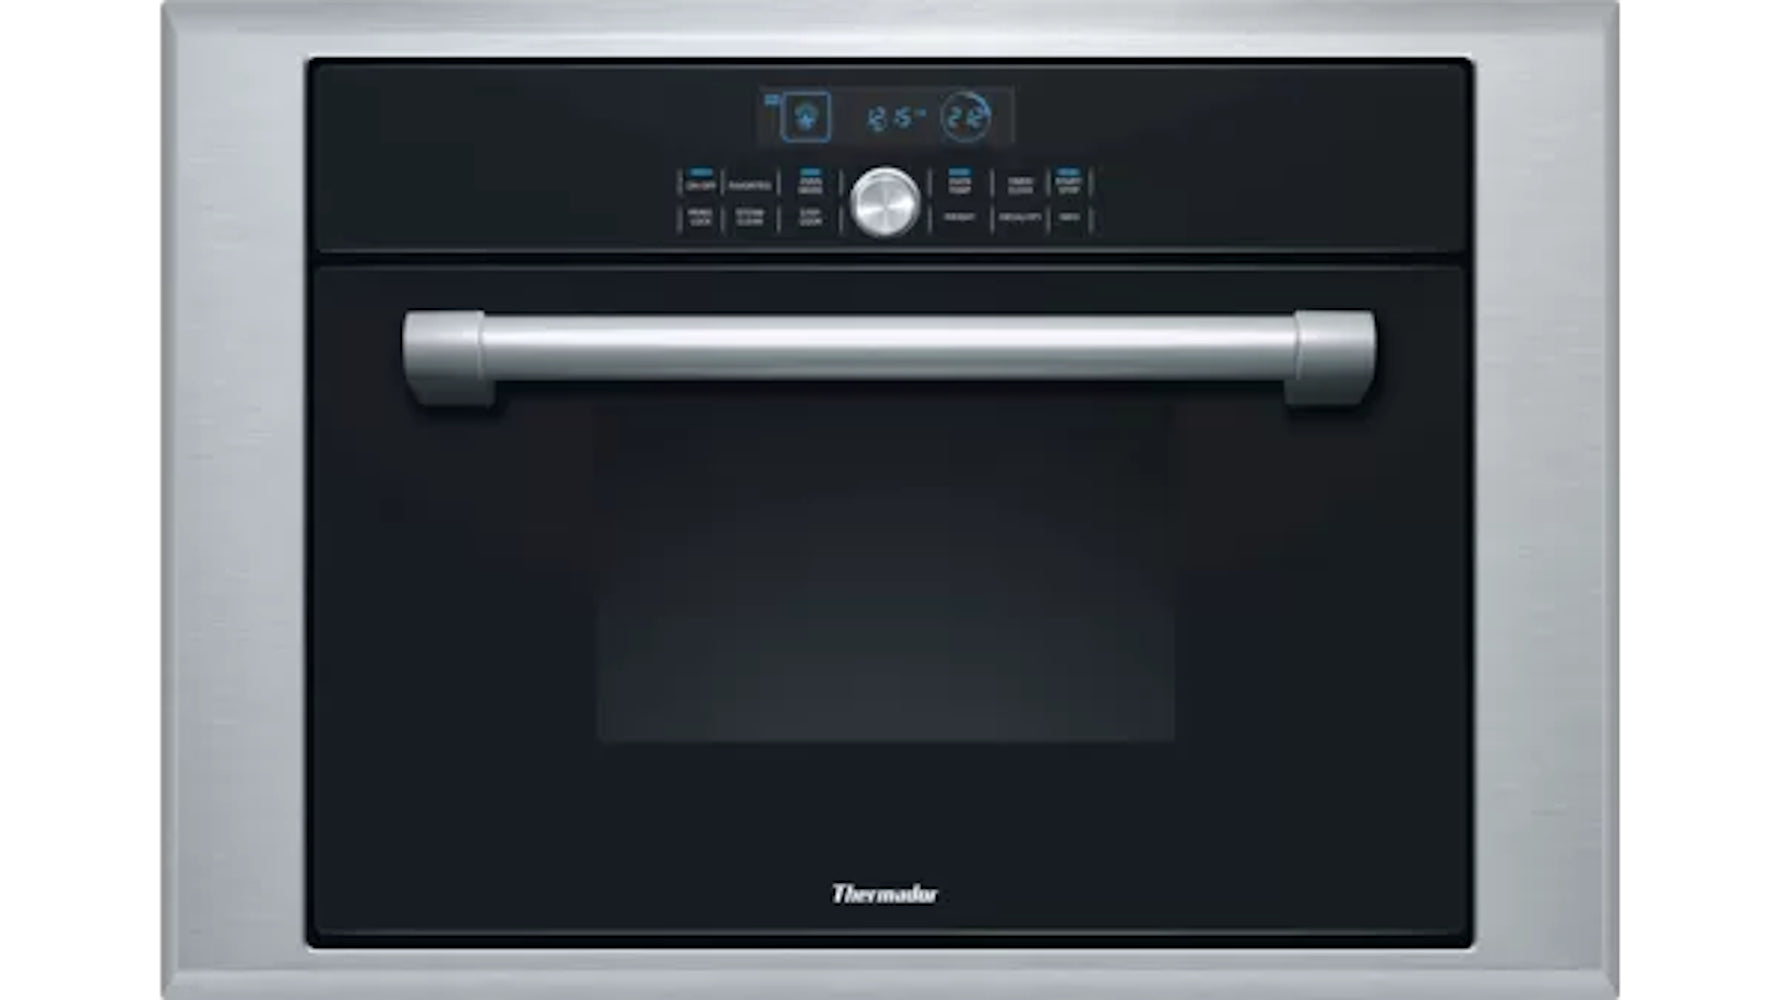 Thermador - 1.4 cu. ft Single Wall Oven in Black - MES301HP